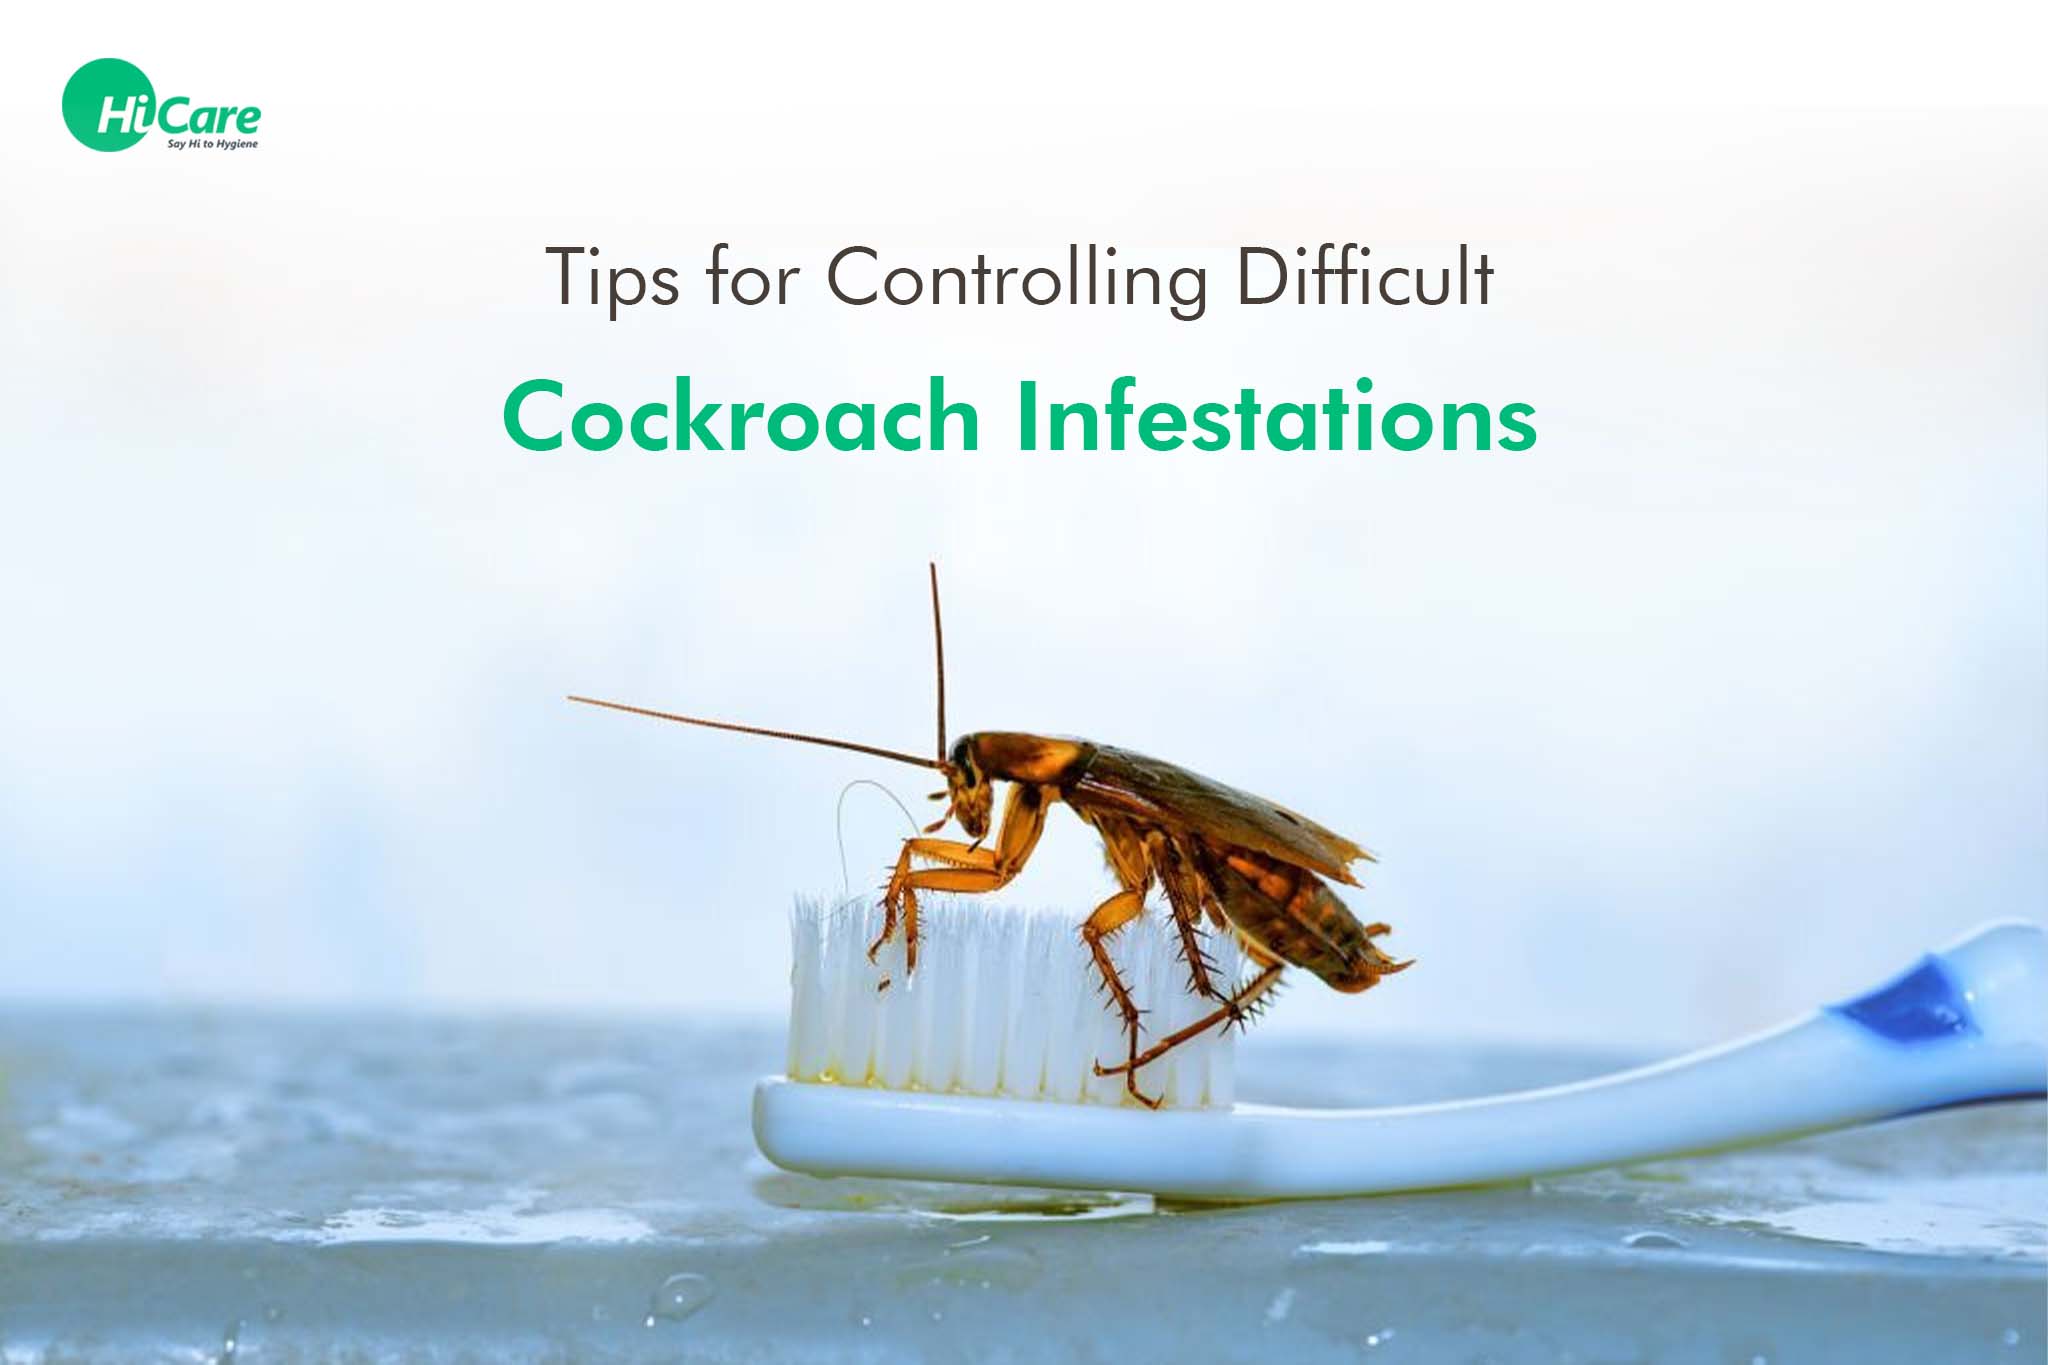 7 Tips on How to Control Difficult Cockroach Infestations at Home